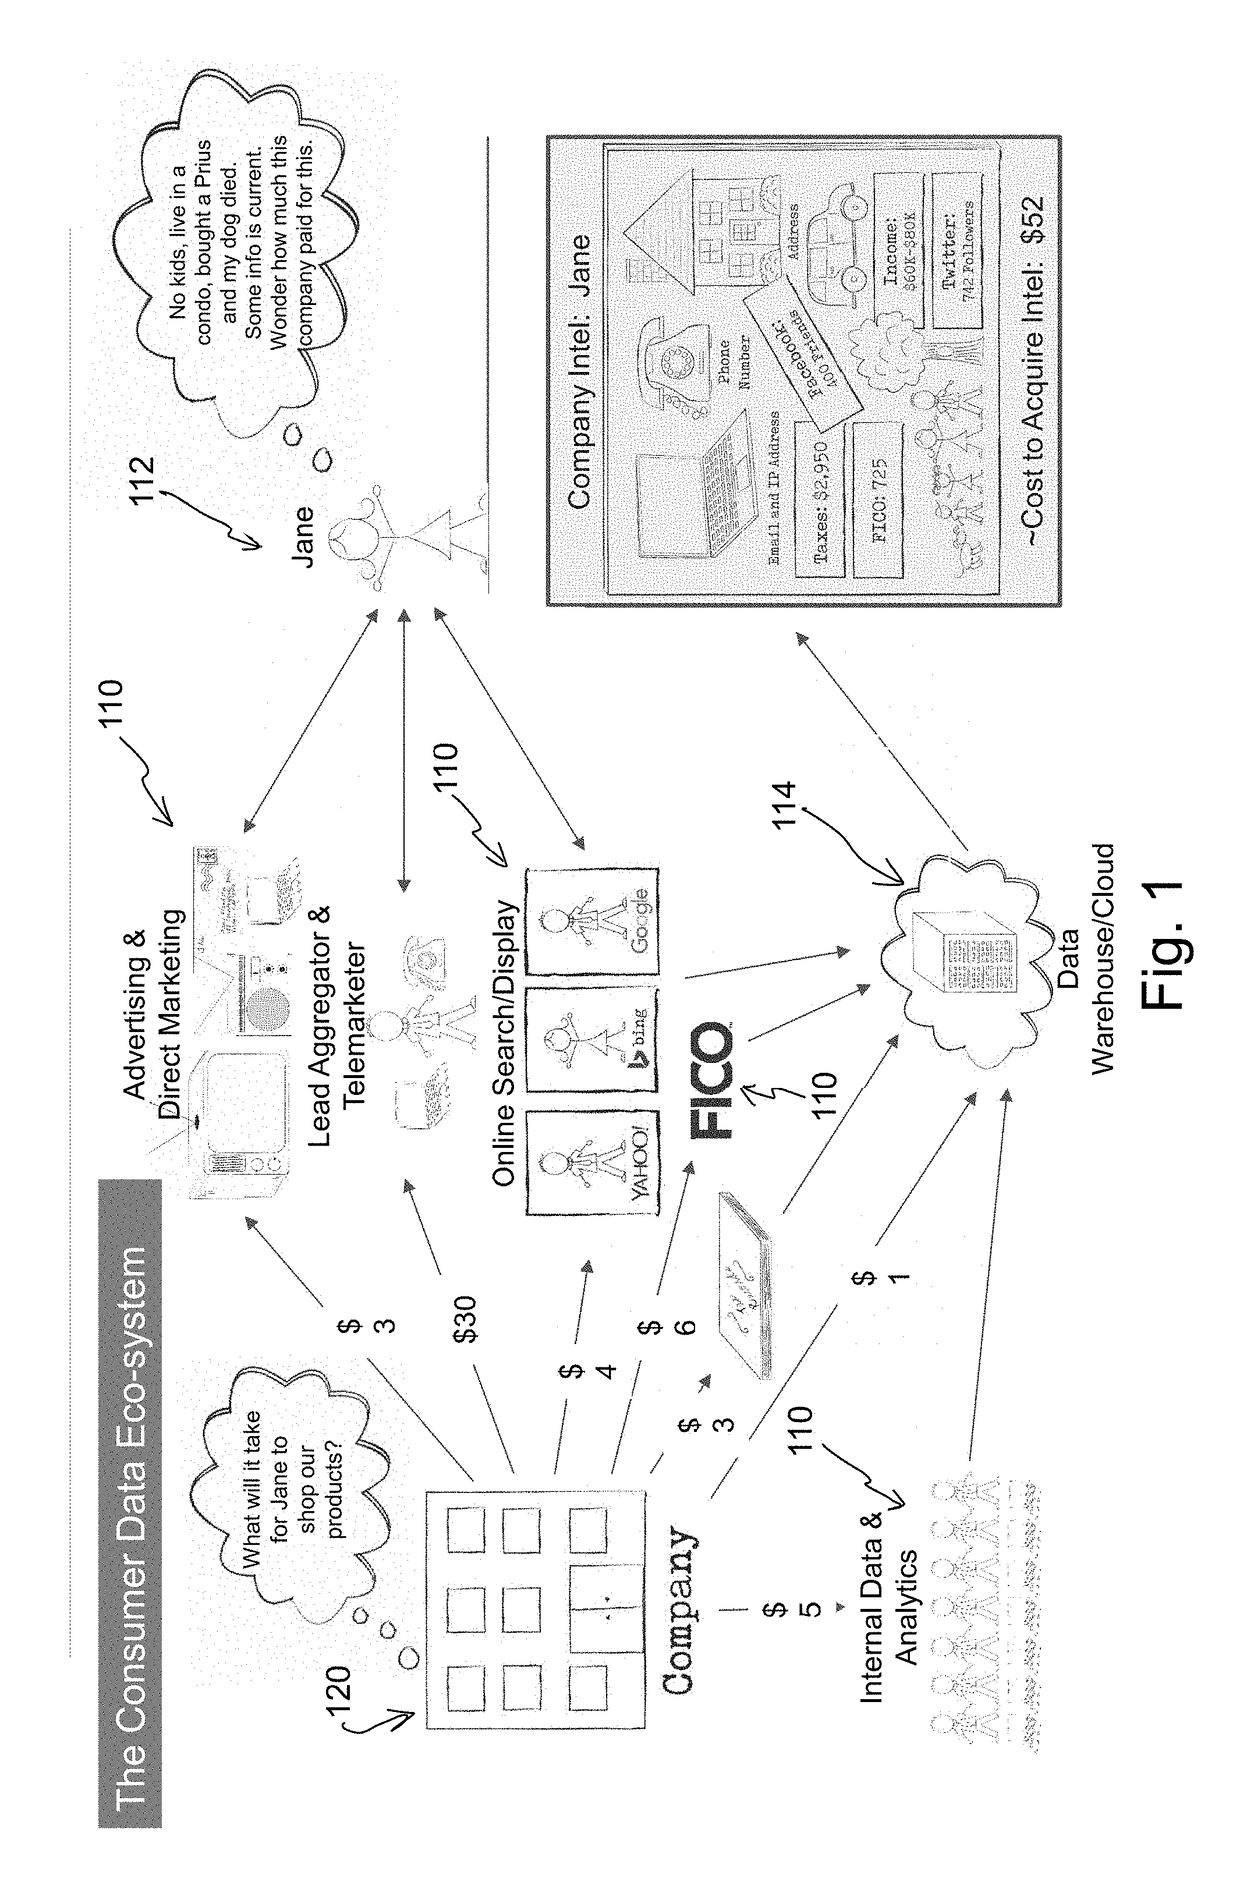 Social business network system and method